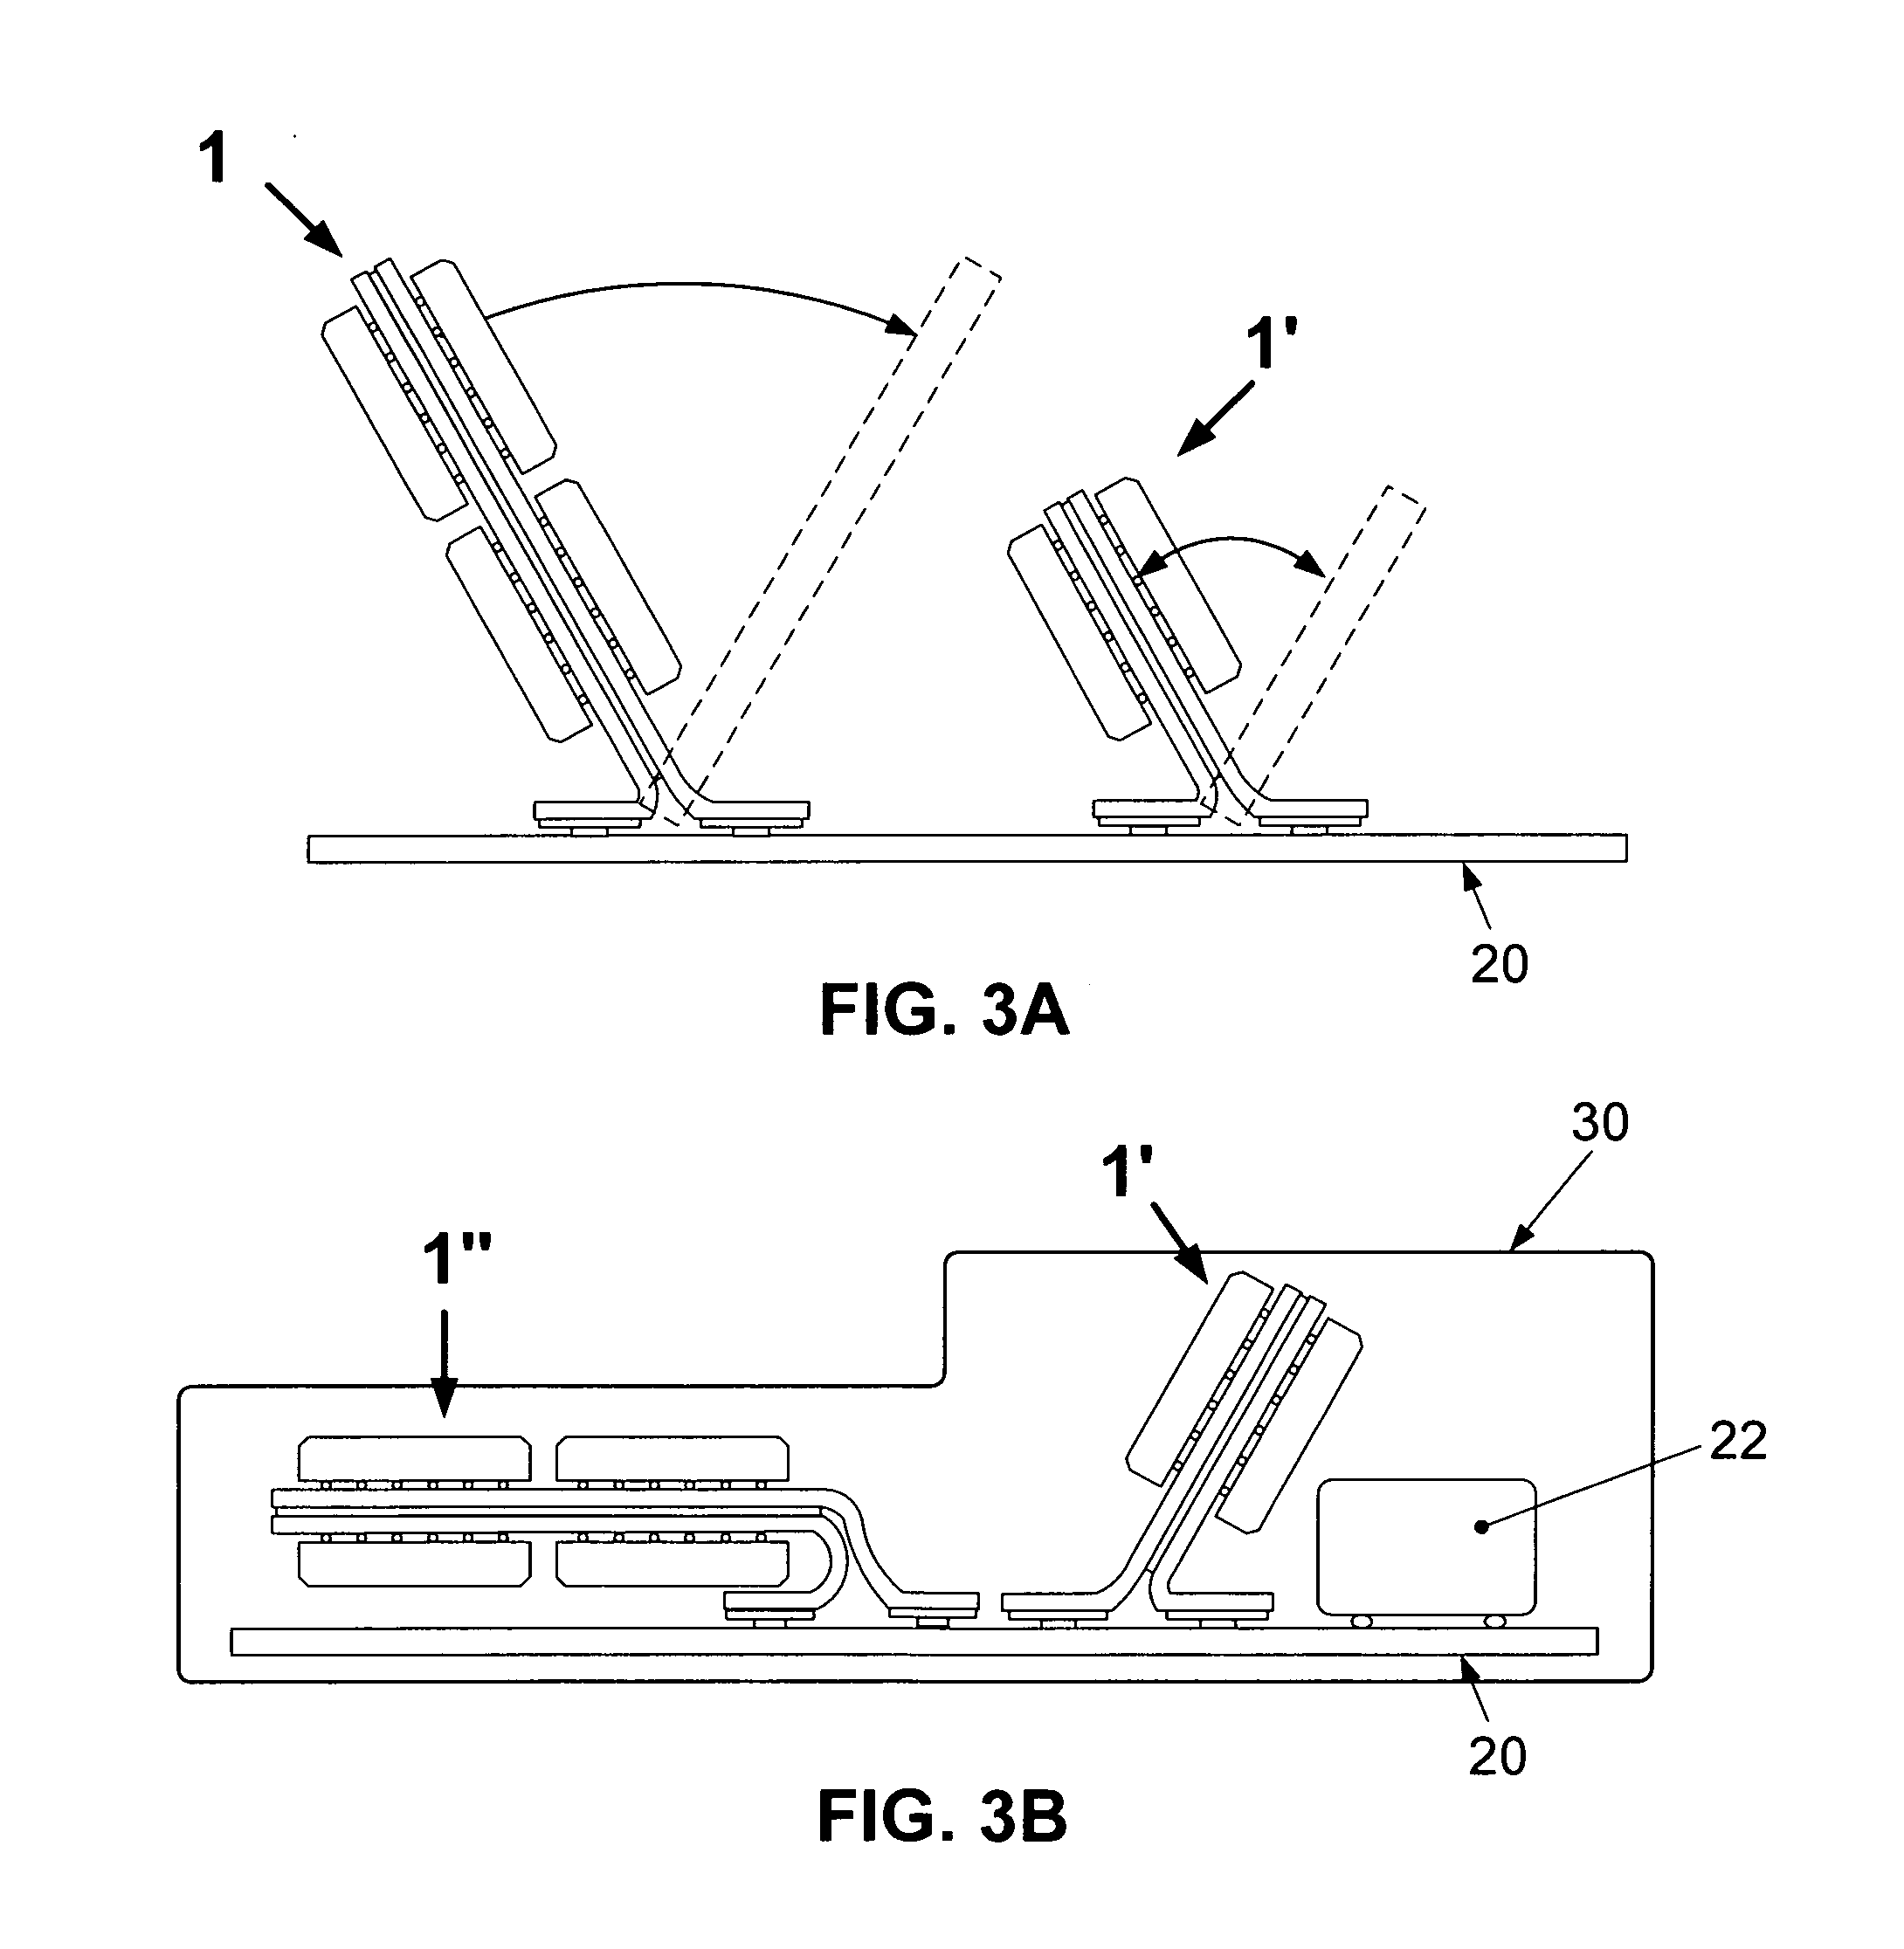 Rigid circuit board with flexibly attached module